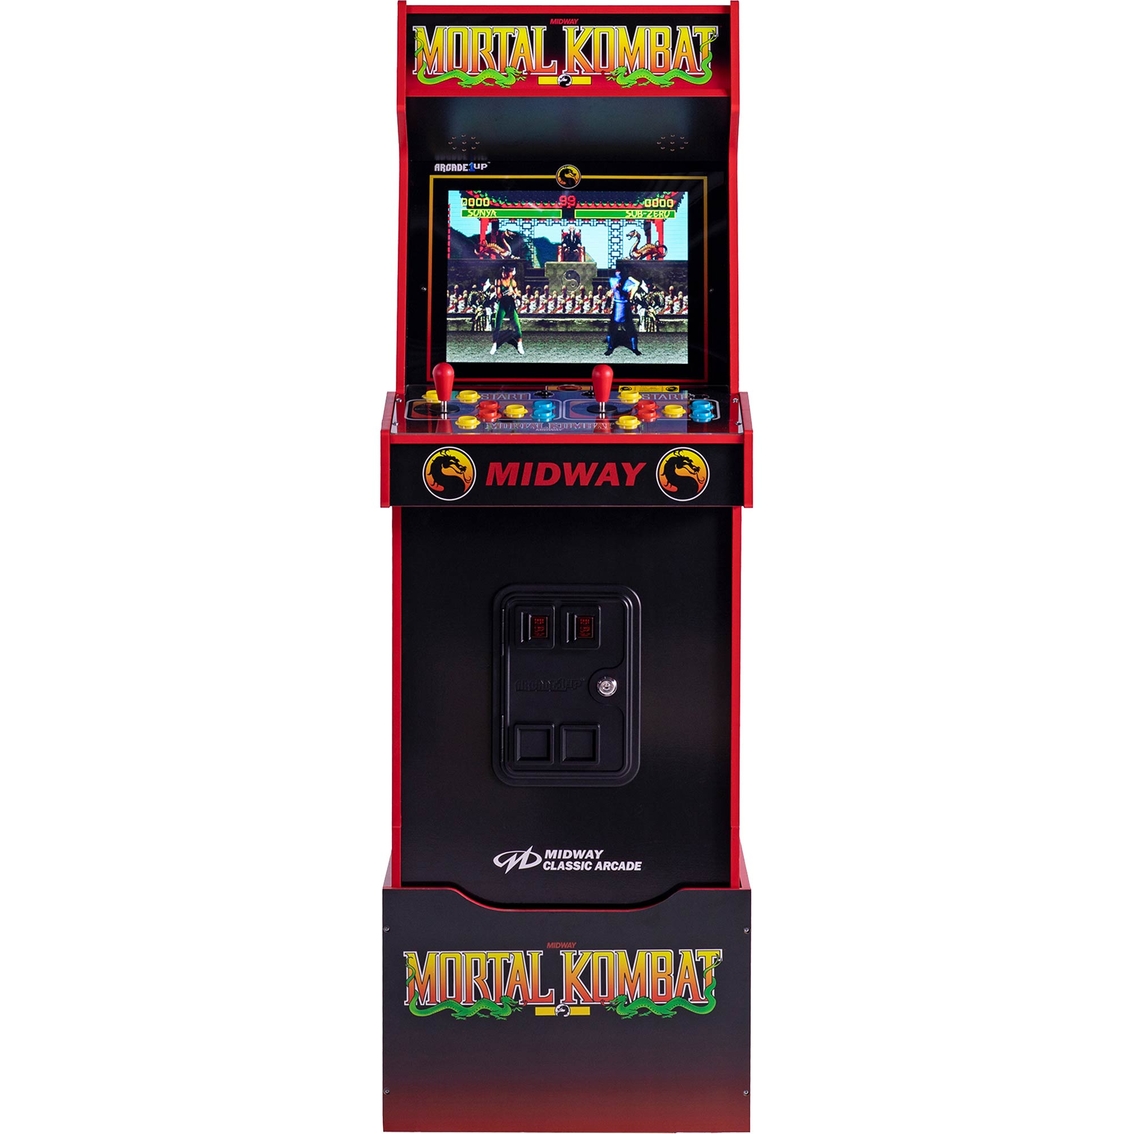 Arcade 1UP MK 30th Anniversary Edition Legacy - Image 4 of 8